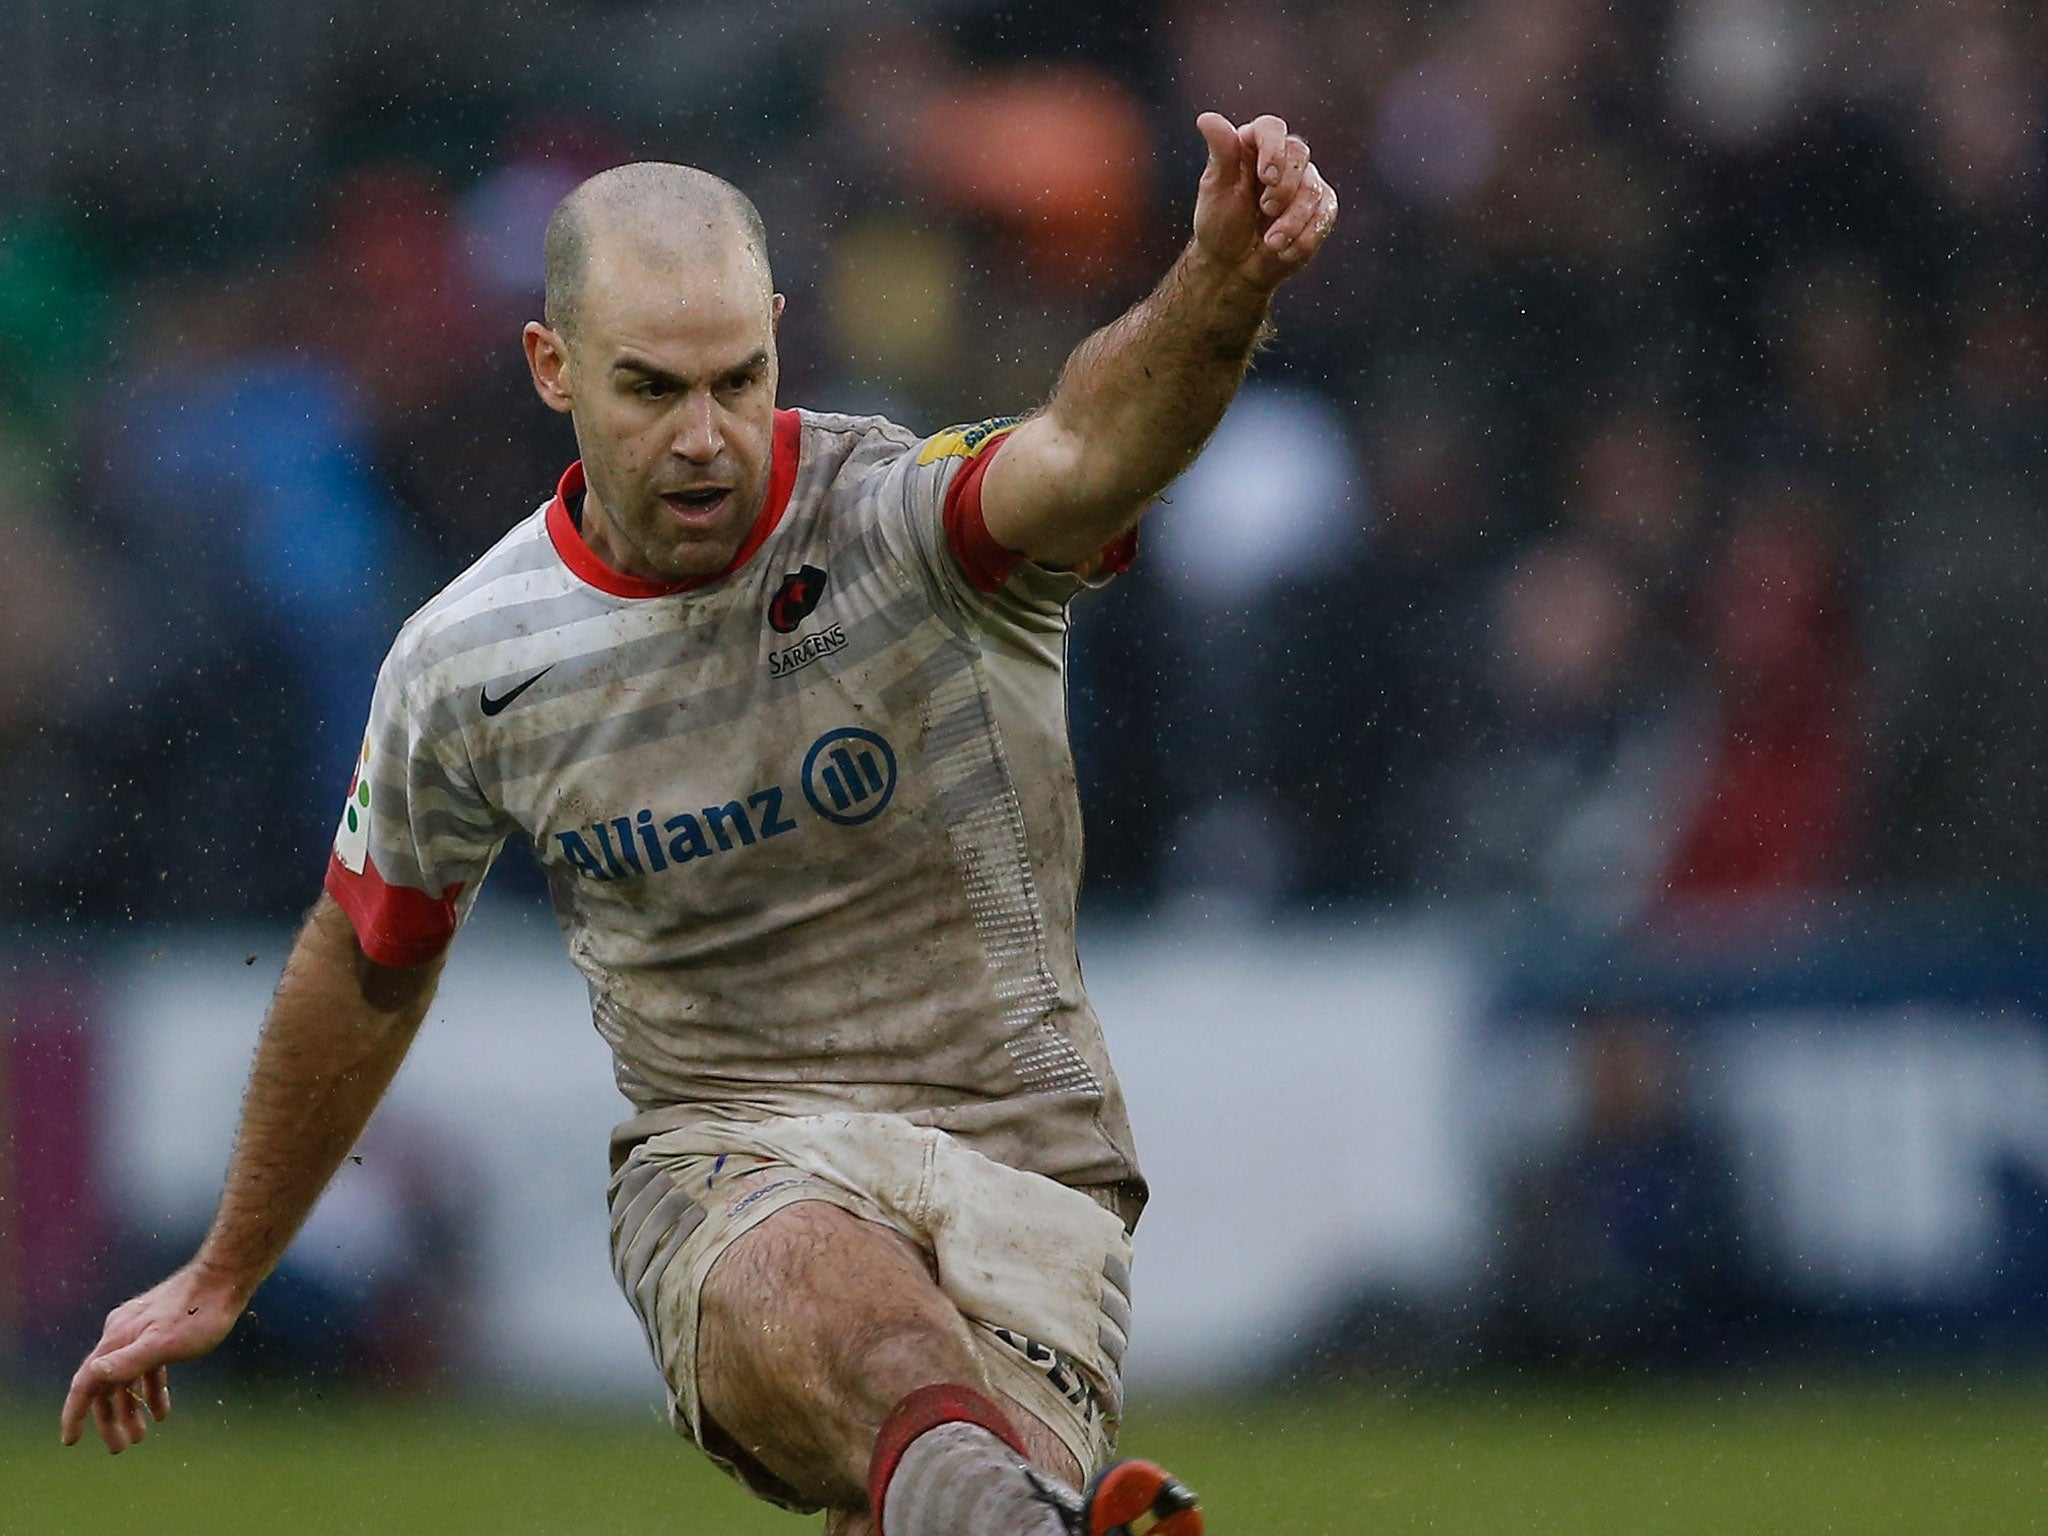 In the swing: Charlie Hodgson of Sarries kicks on his way to 17 points